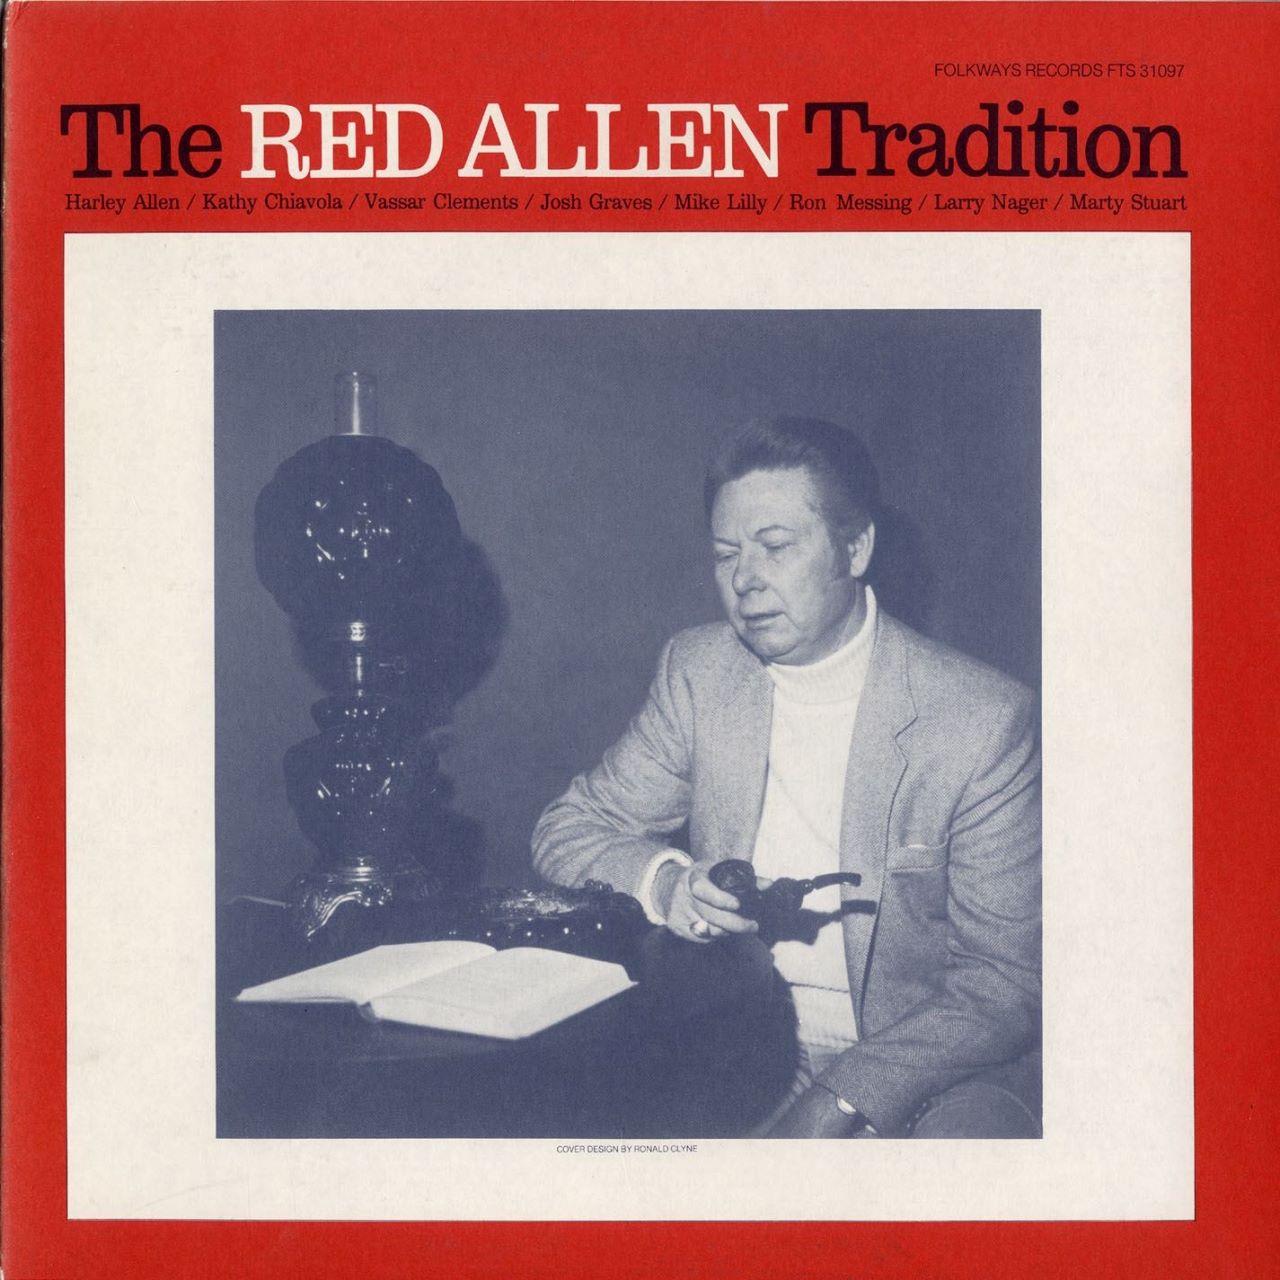 Red Allen - The Red Allen Tradition cover album